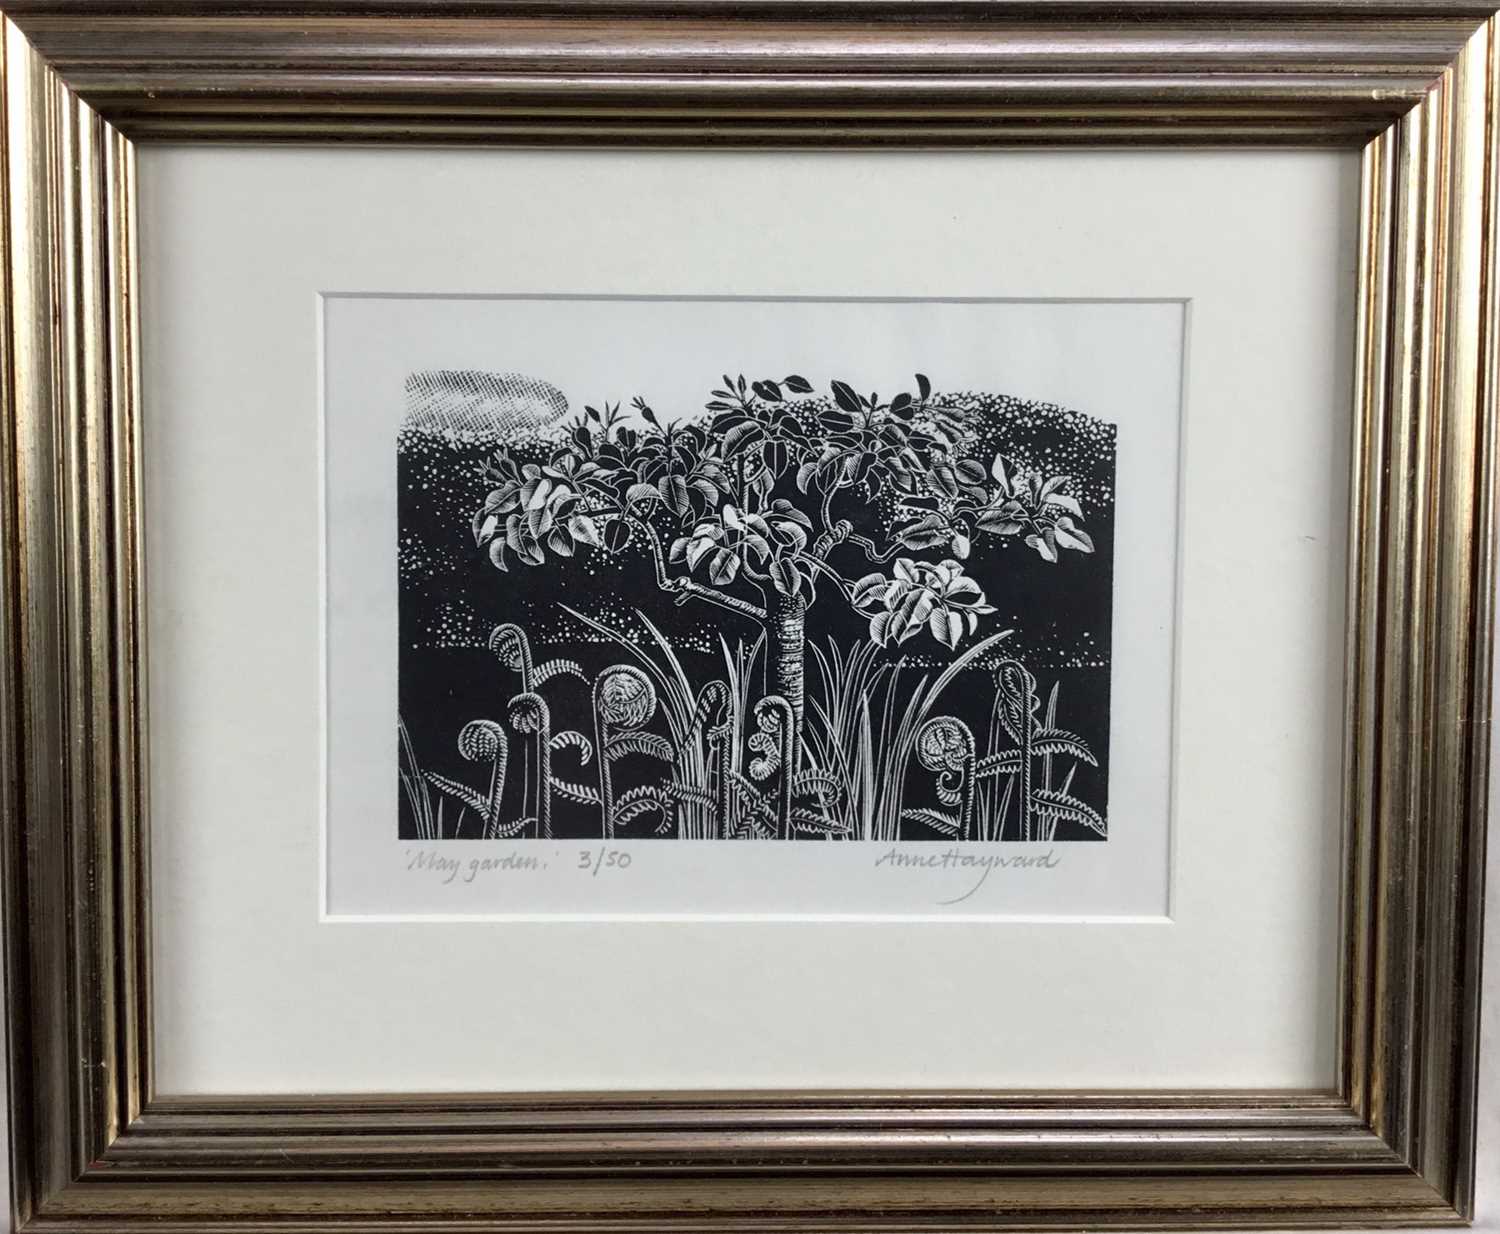 Anne Hayward, contemporary, pair of signed limited edition woodcut engravings, “A Year In The Garden